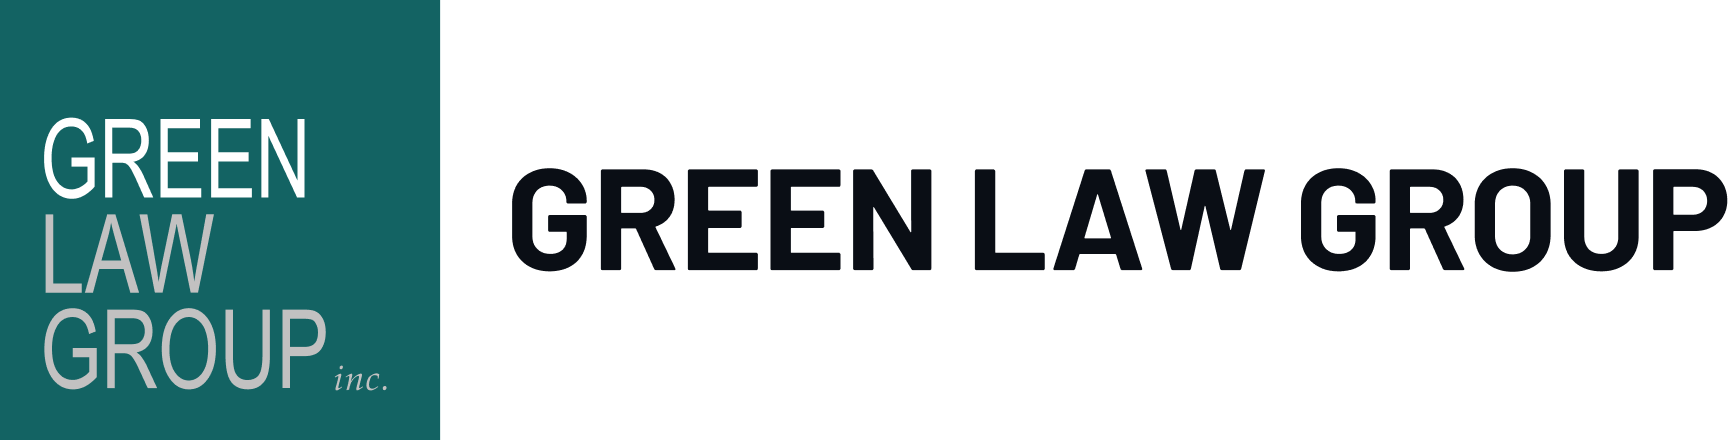 Green Law Group